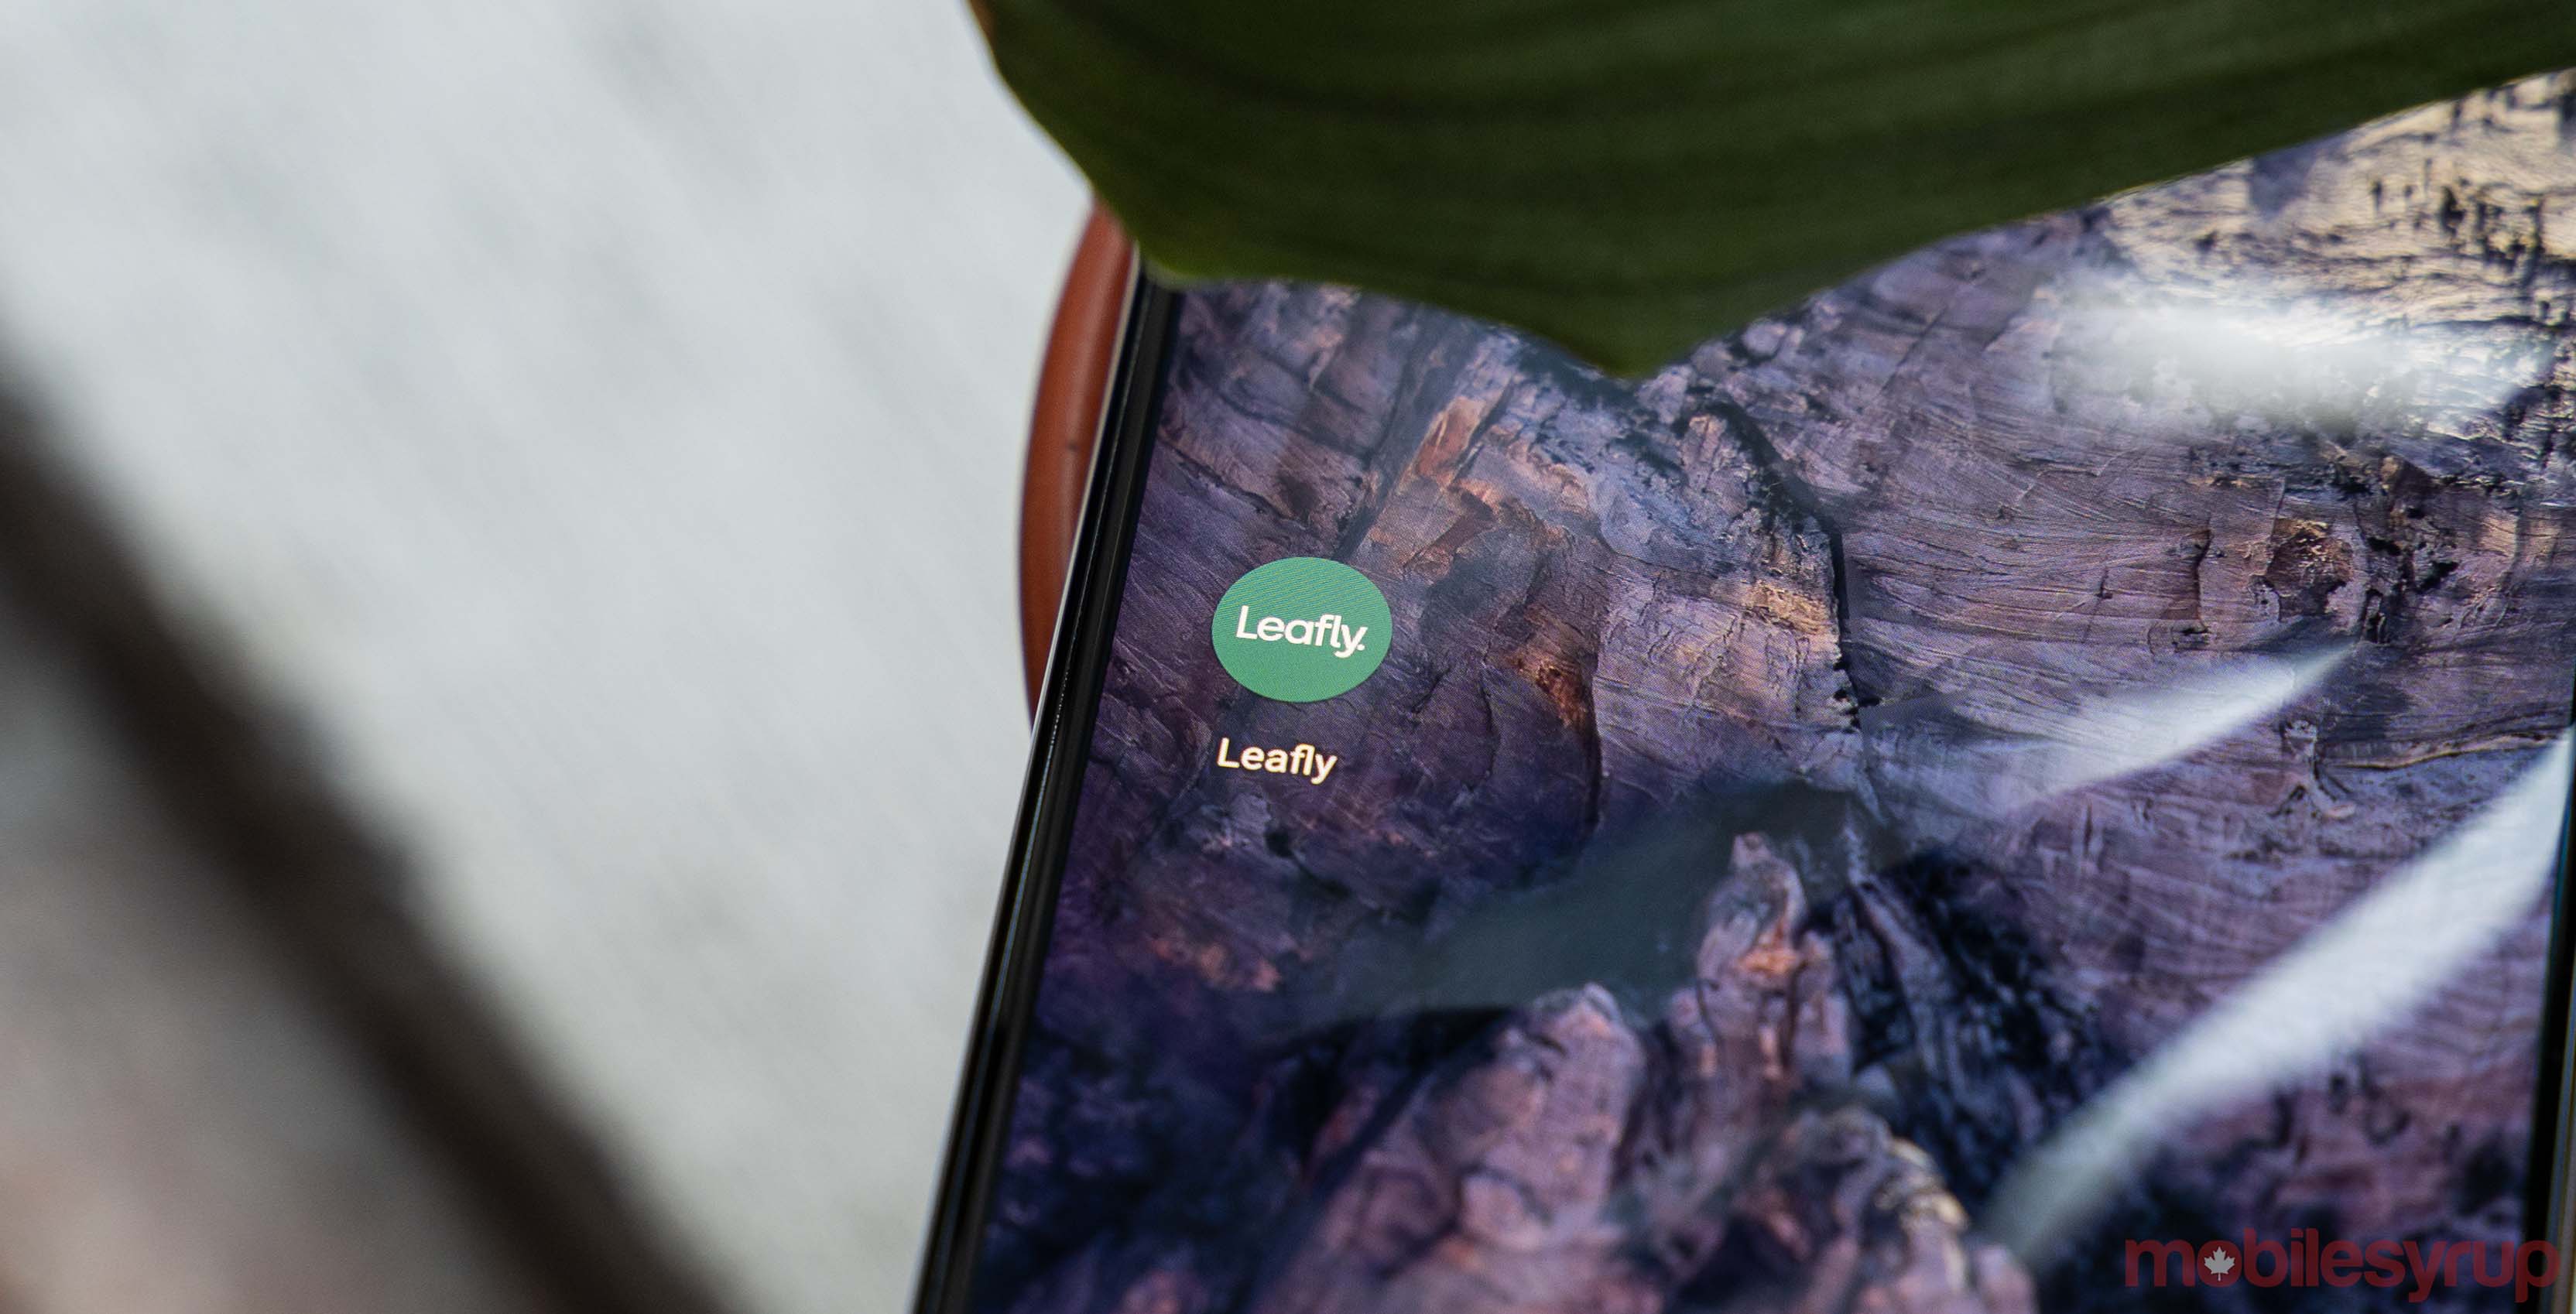 Leafly app